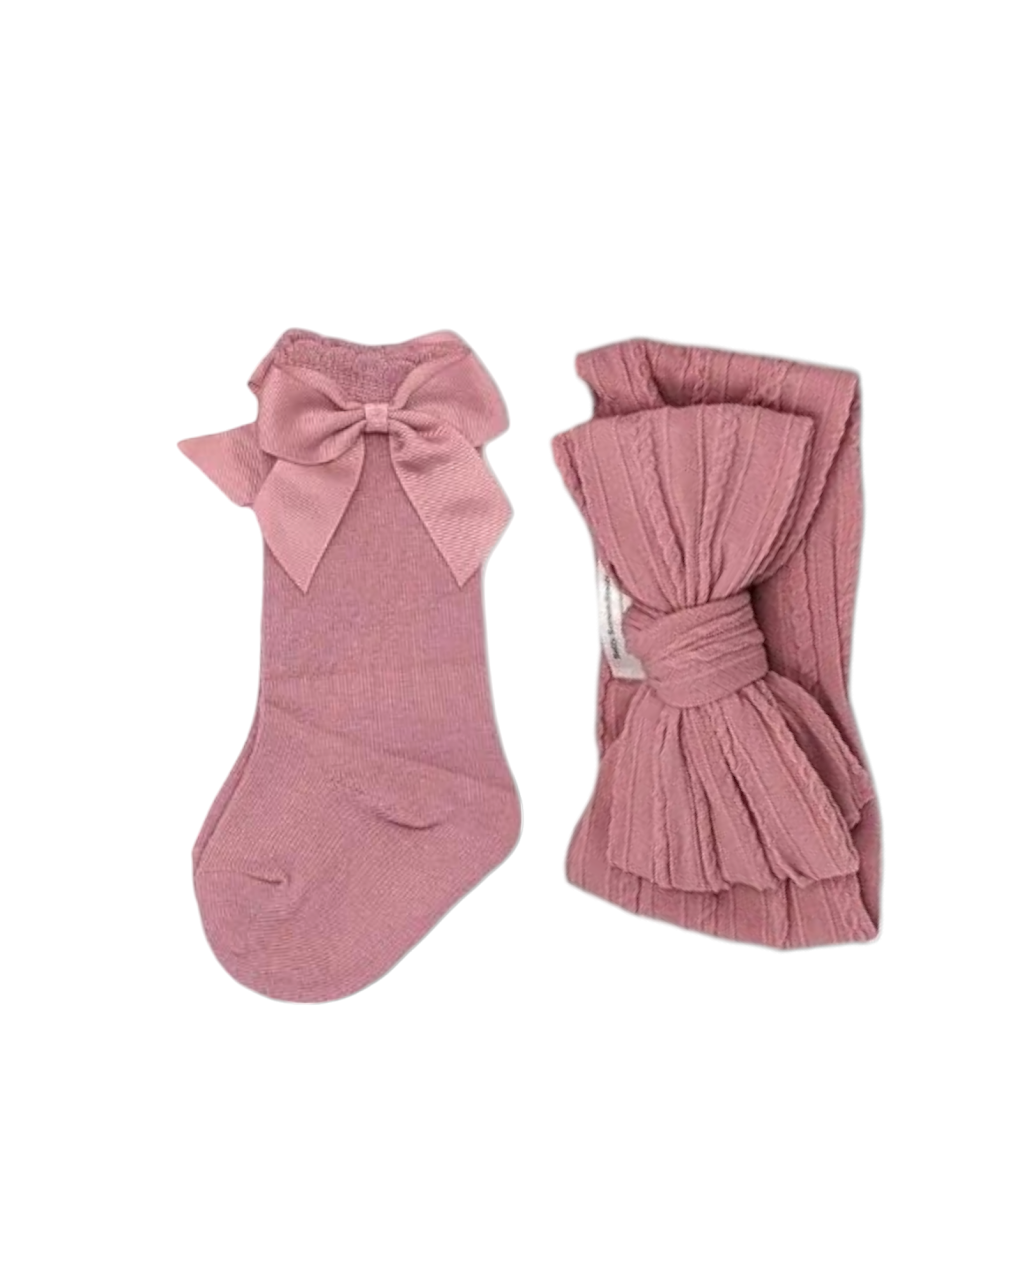 Our Light Berry Larger Headwrap & Knee High Socks Set - Betty Brown Boutique Ltd